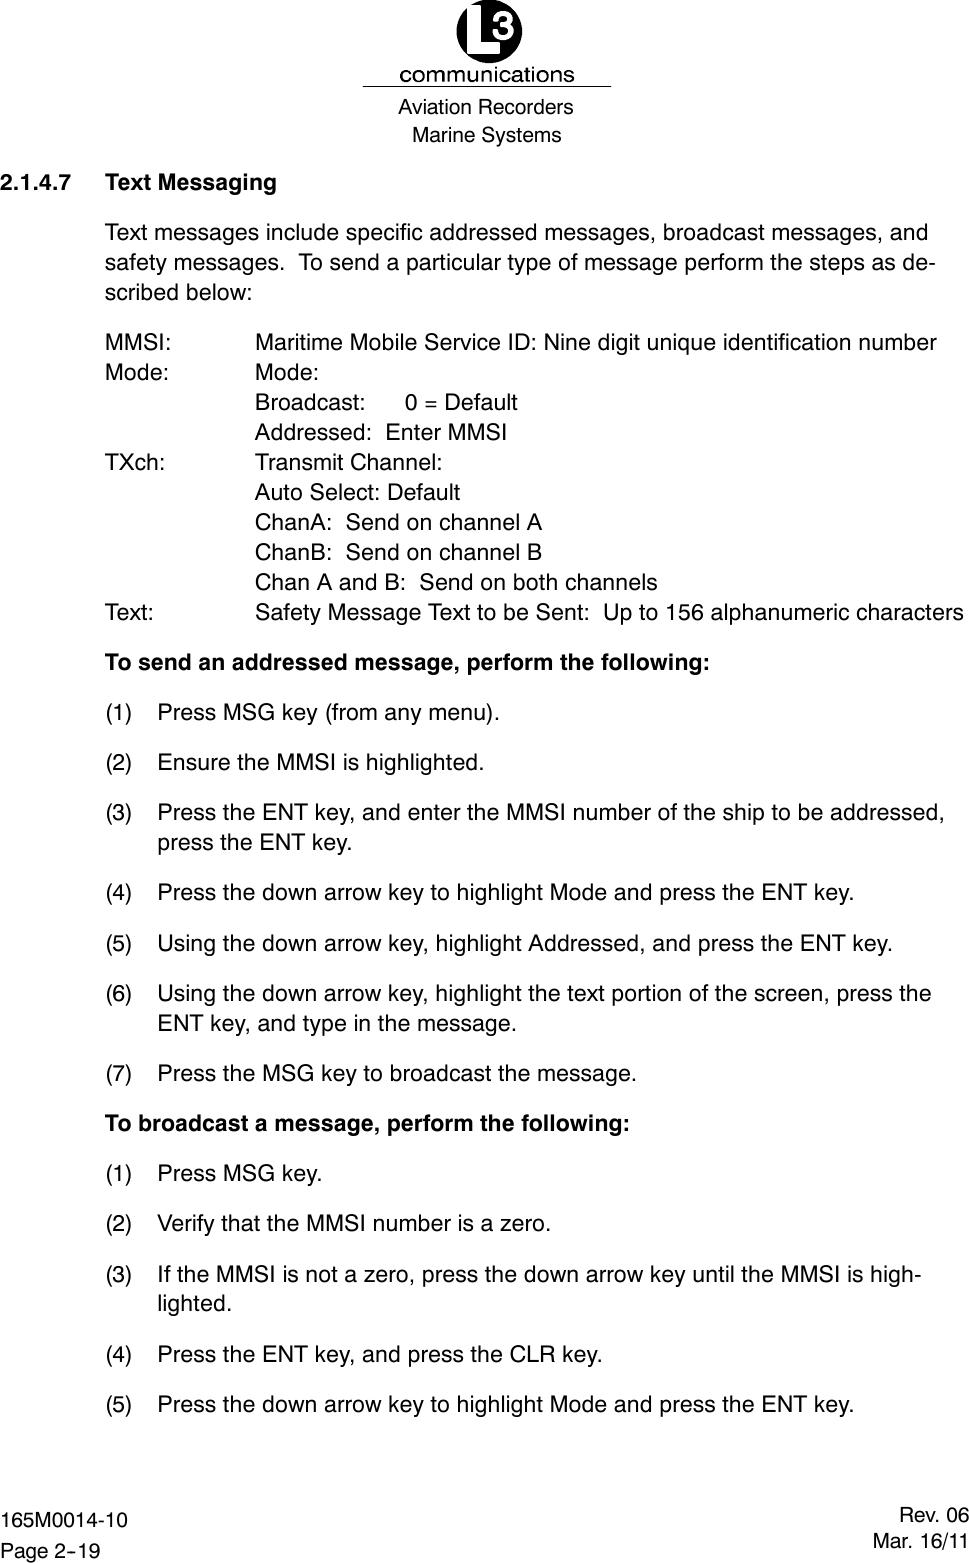 Marine SystemsAviation RecordersRev. 06Mar. 16/11165M0014-10Page 2--192.1.4.7 Text MessagingText messages include specific addressed messages, broadcast messages, andsafety messages. To send a particular type of message perform the steps as de-scribed below:MMSI: Maritime Mobile Service ID: Nine digit unique identification numberMode: Mode:Broadcast: 0 = DefaultAddressed: Enter MMSITXch: Transmit Channel:Auto Select: DefaultChanA: Send on channel AChanB: Send on channel BChan A and B: Send on both channelsText: Safety Message Text to be Sent: Up to 156 alphanumeric charactersTo send an addressed message, perform the following:(1) Press MSG key (from any menu).(2) Ensure the MMSI is highlighted.(3) Press the ENT key, and enter the MMSI number of the ship to be addressed,press the ENT key.(4) Press the down arrow key to highlight Mode and press the ENT key.(5) Using the down arrow key, highlight Addressed, and press the ENT key.(6) Using the down arrow key, highlight the text portion of the screen, press theENT key, and type in the message.(7) Press the MSG key to broadcast the message.To broadcast a message, perform the following:(1) Press MSG key.(2) Verify that the MMSI number is a zero.(3) If the MMSI is not a zero, press the down arrow key until the MMSI is high-lighted.(4) Press the ENT key, and press the CLR key.(5) Press the down arrow key to highlight Mode and press the ENT key.